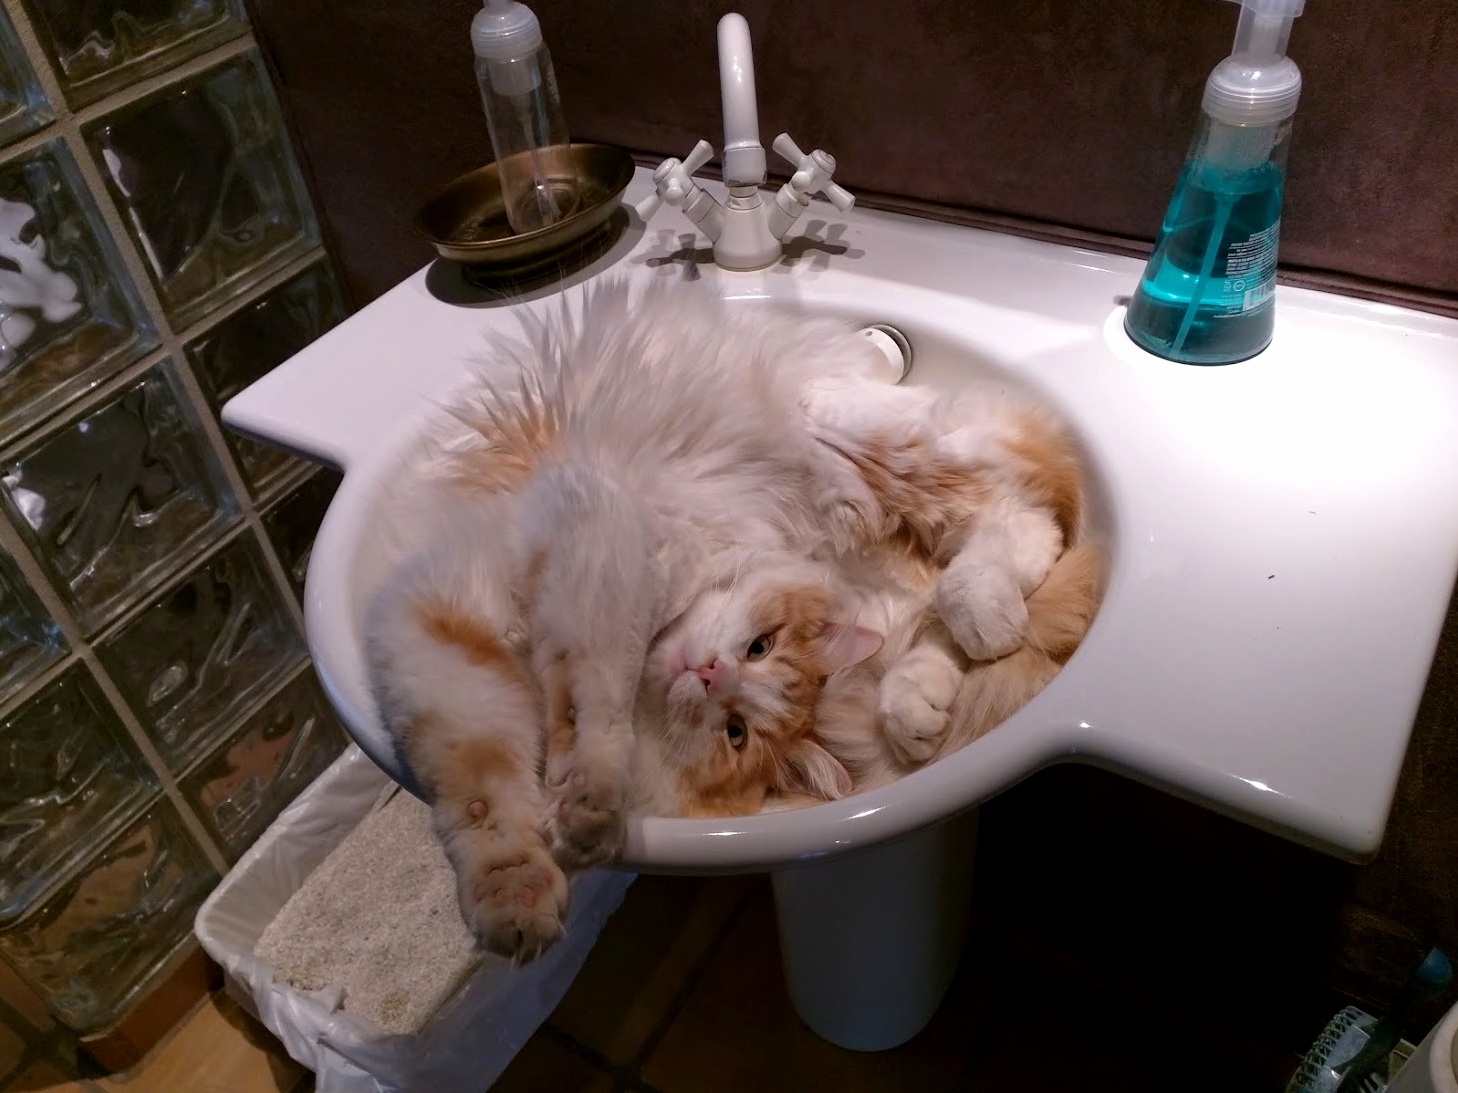 Sunday morning… too early to get out of the sink just yet…